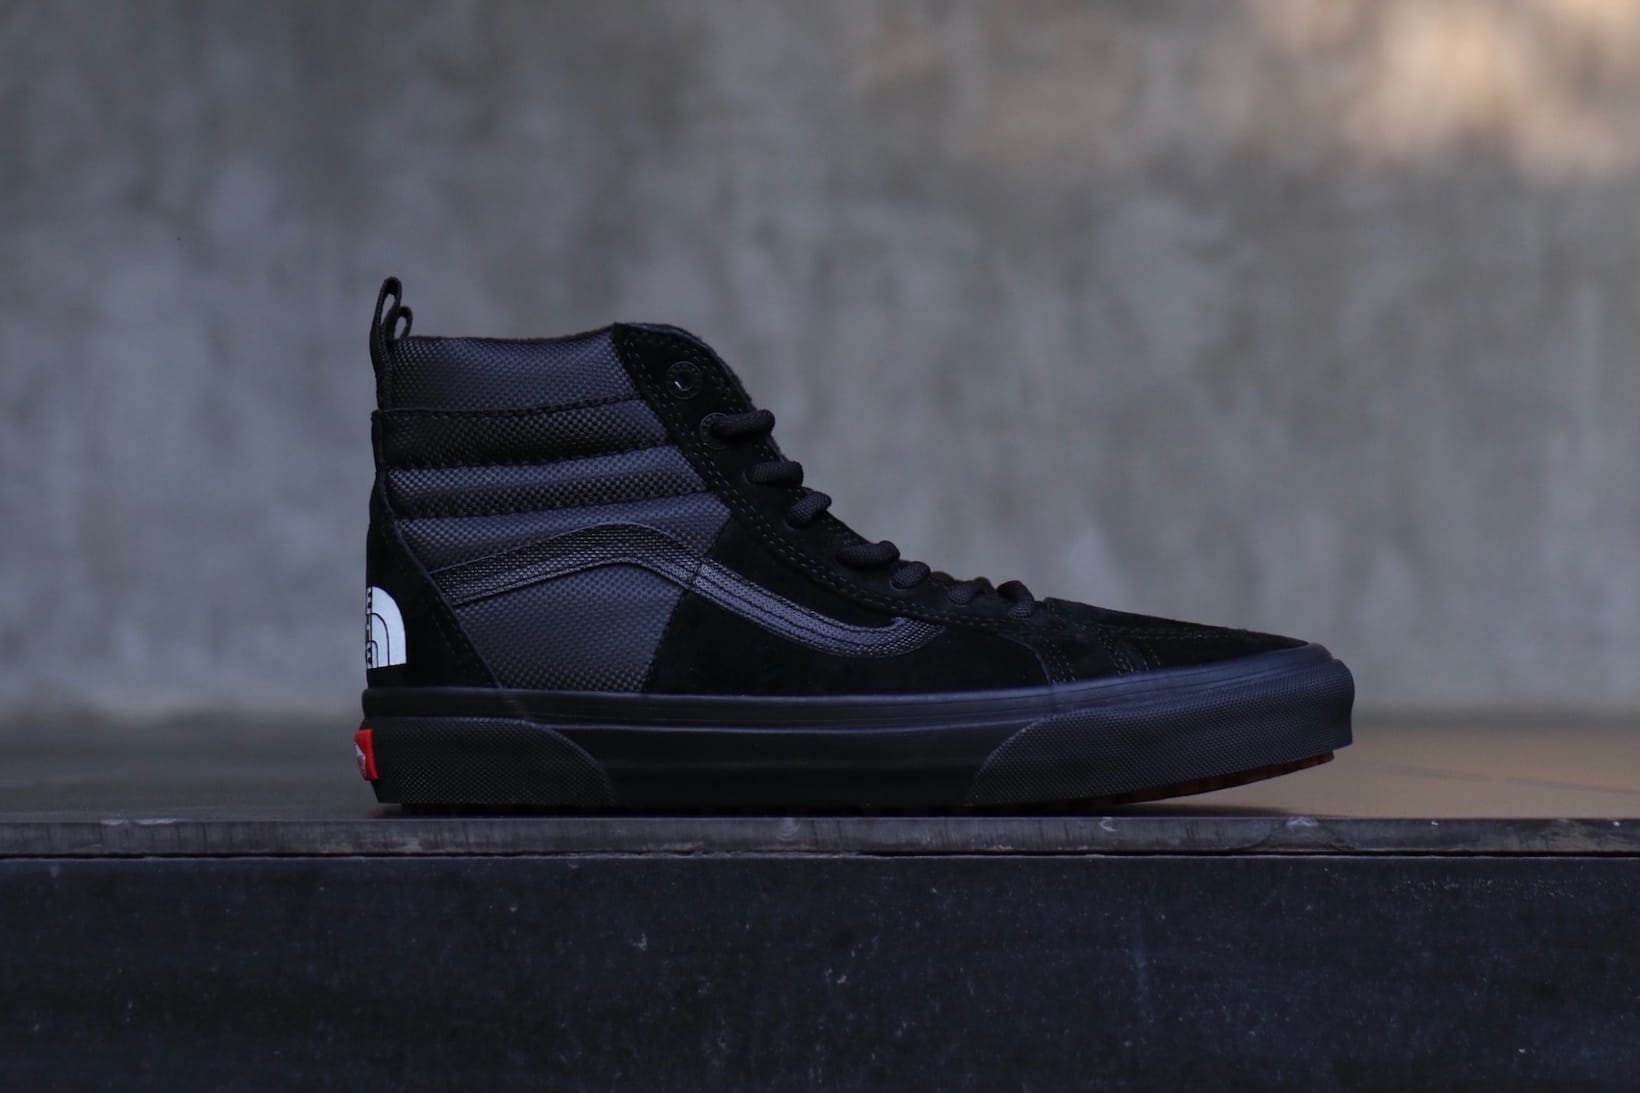 vans and north face collab shoes